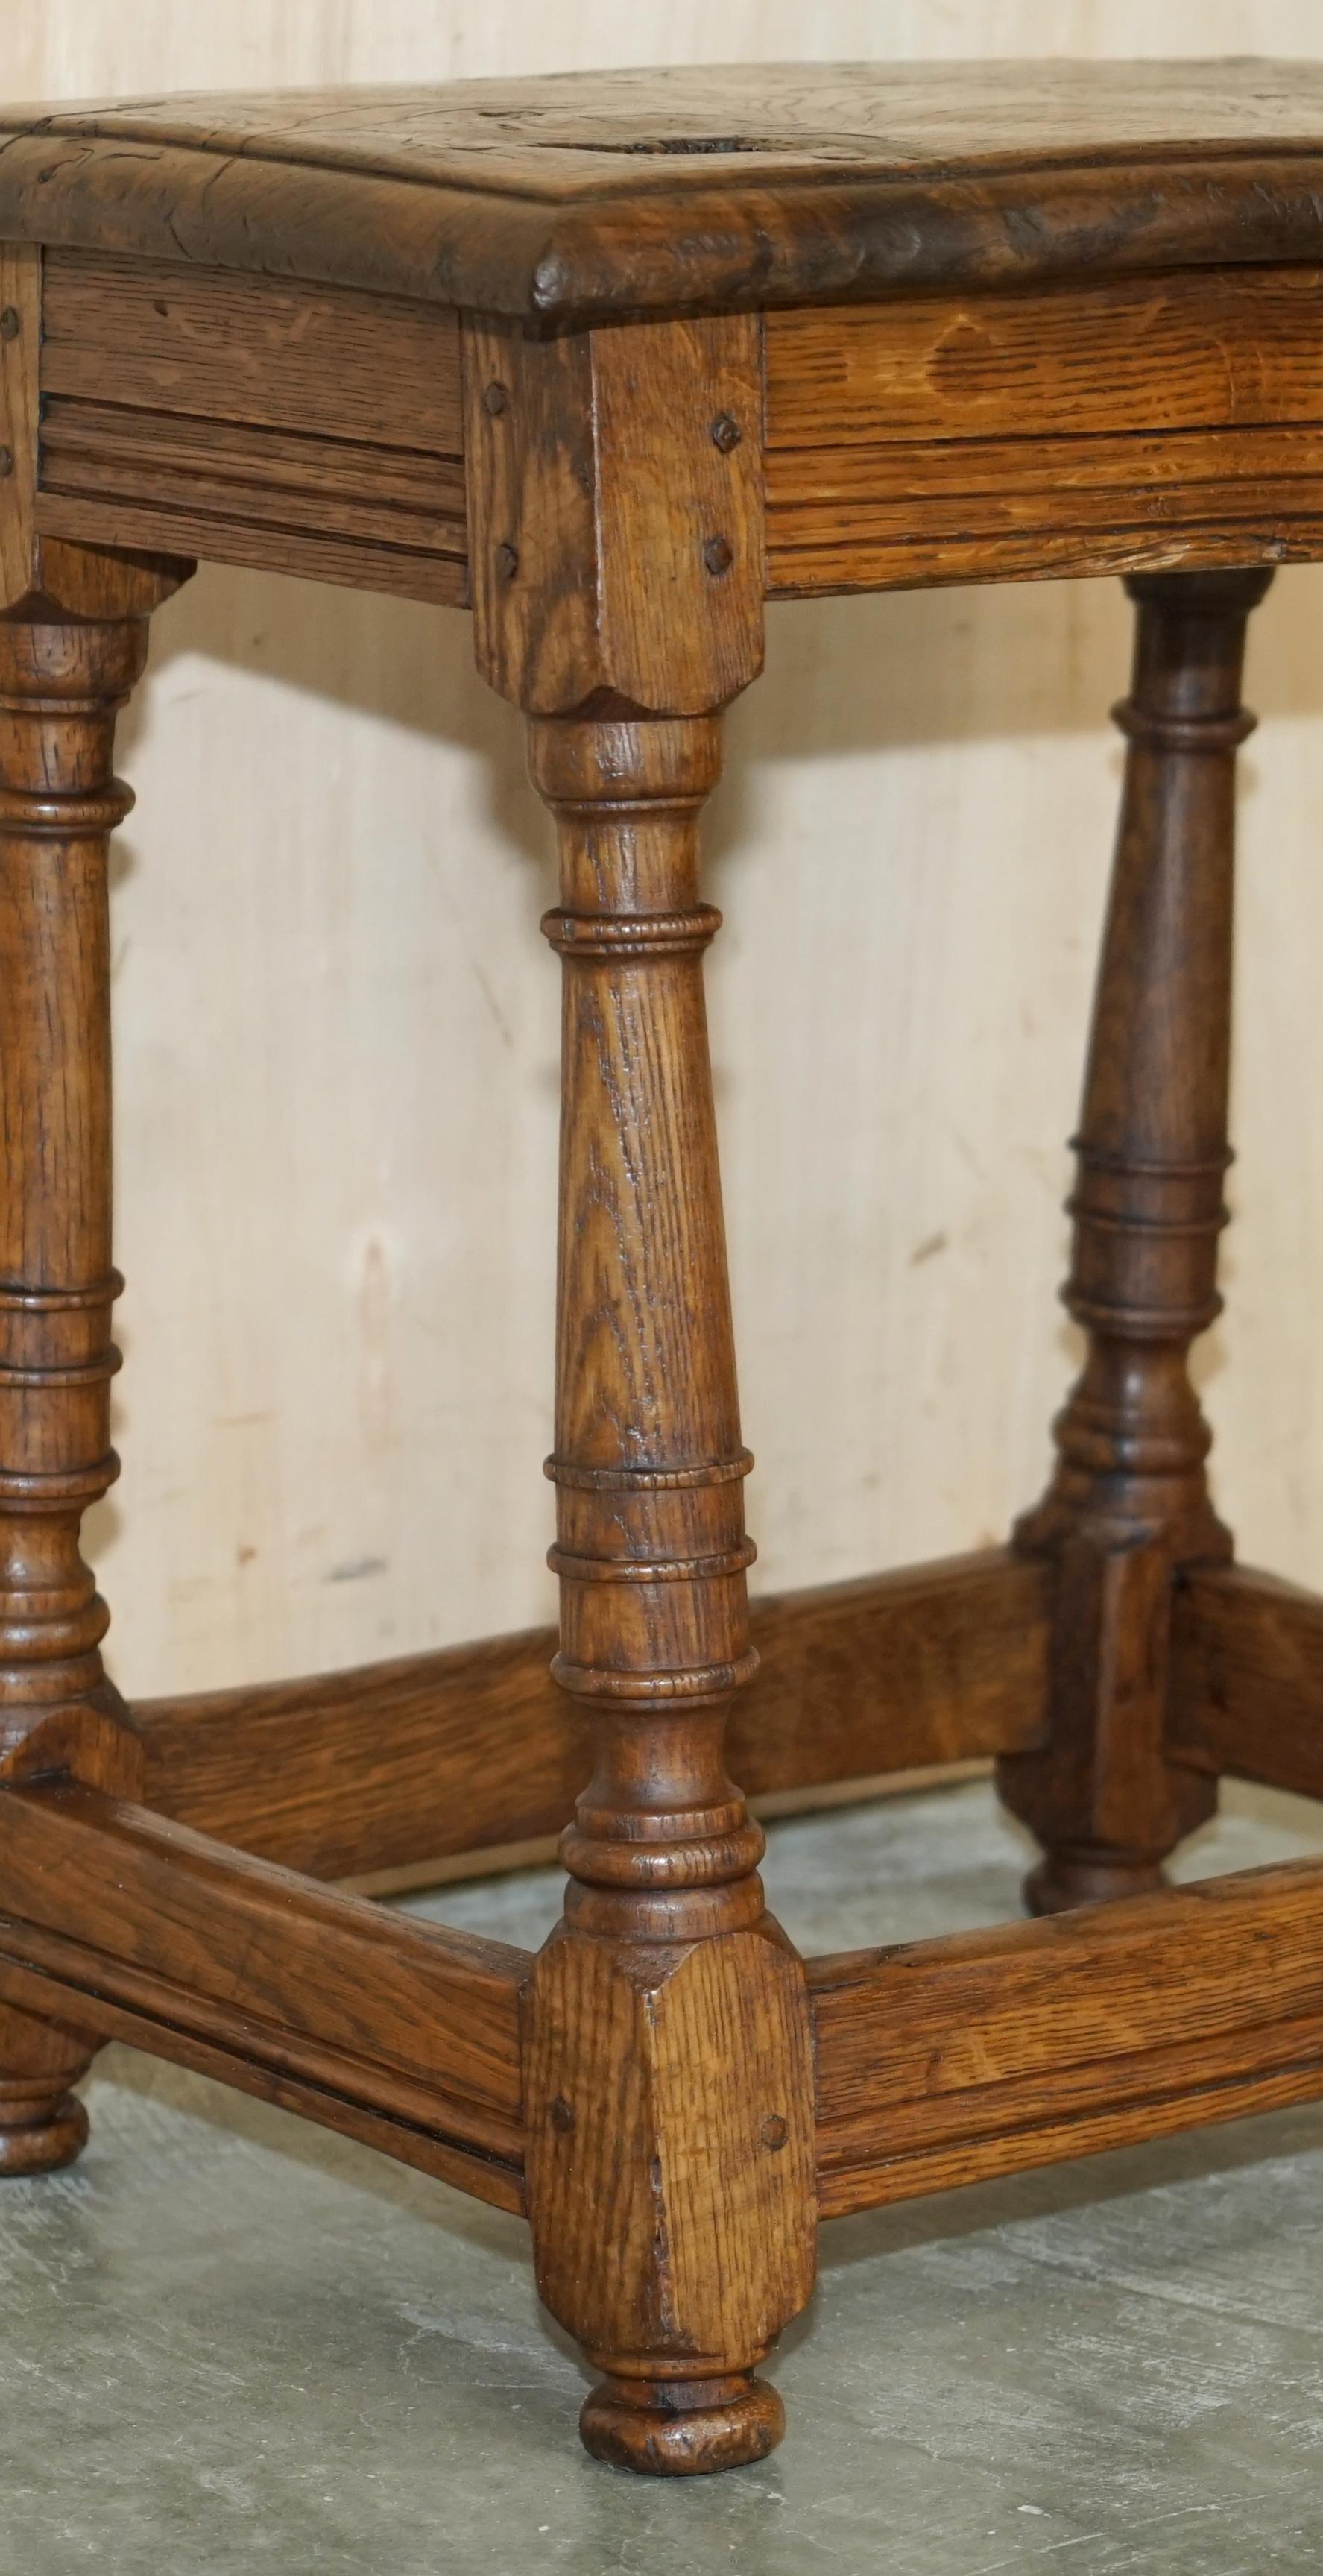 Oak STUNNiNG HEAVILY BURRED OAK ANTIQUE 18TH CENTURY CIRCA 1780 JOINTED STOOL TABLE For Sale